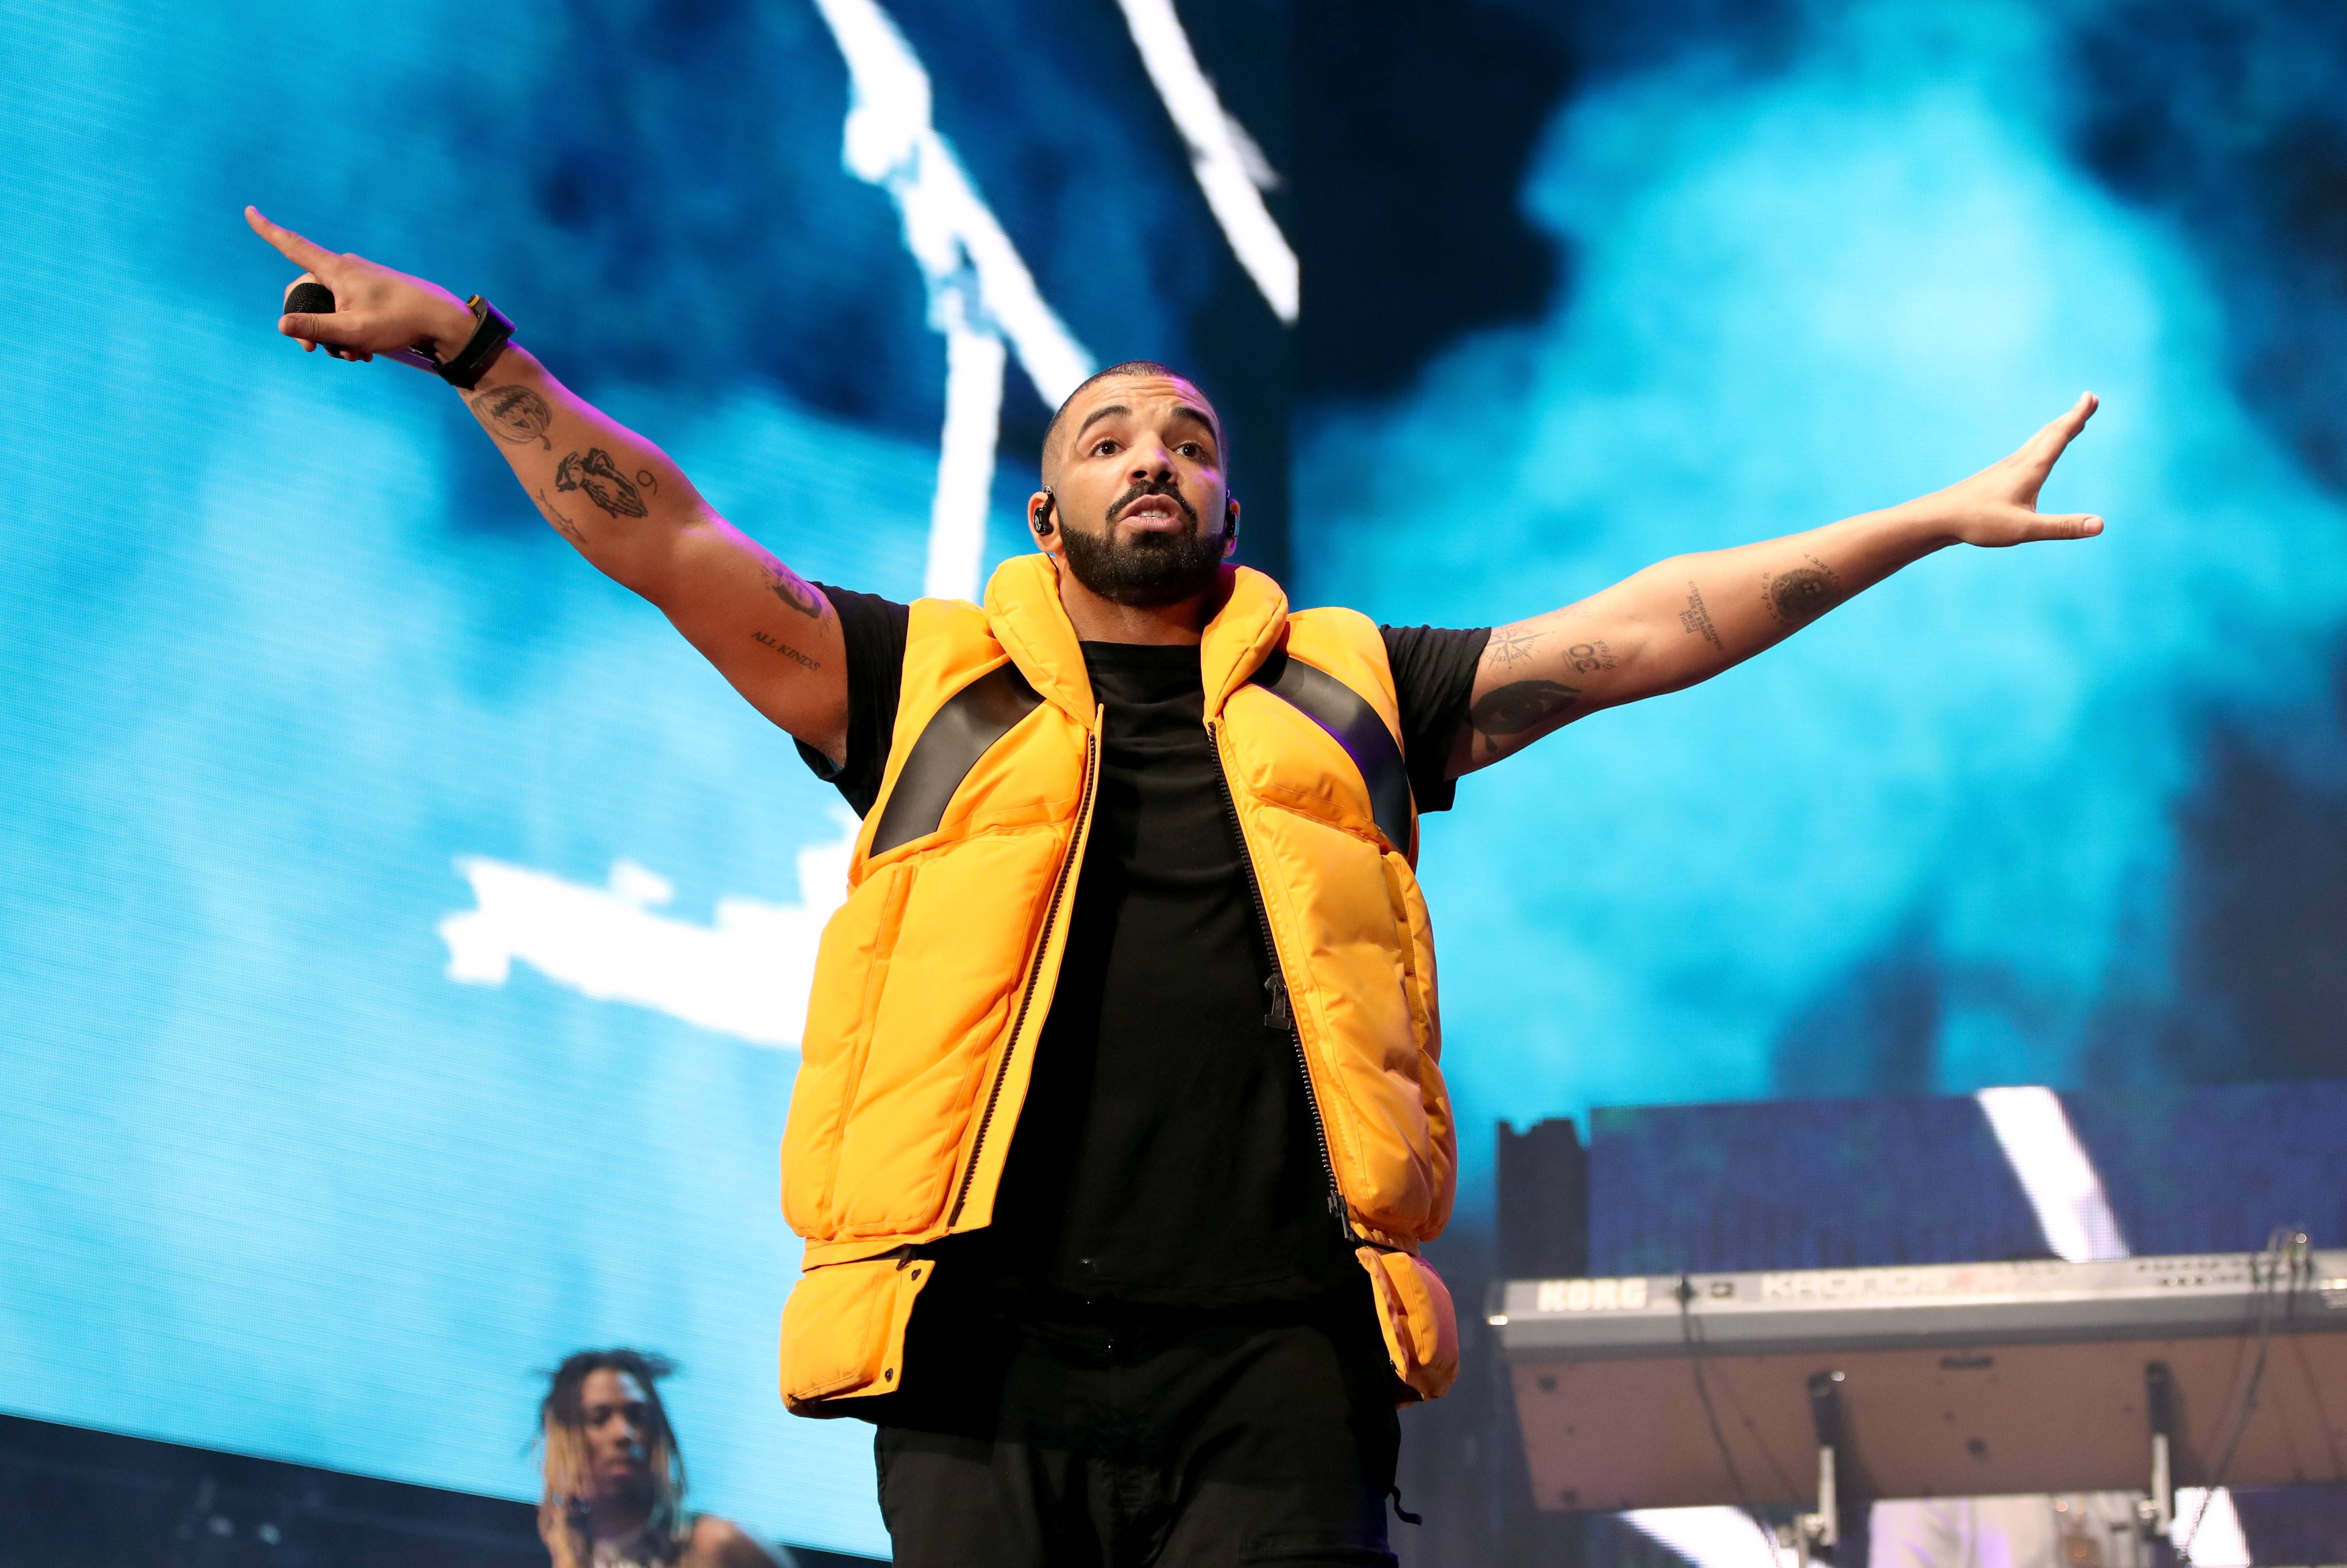 Drake performs at the Wireless Festival in London on July 7, 2018. - Drake